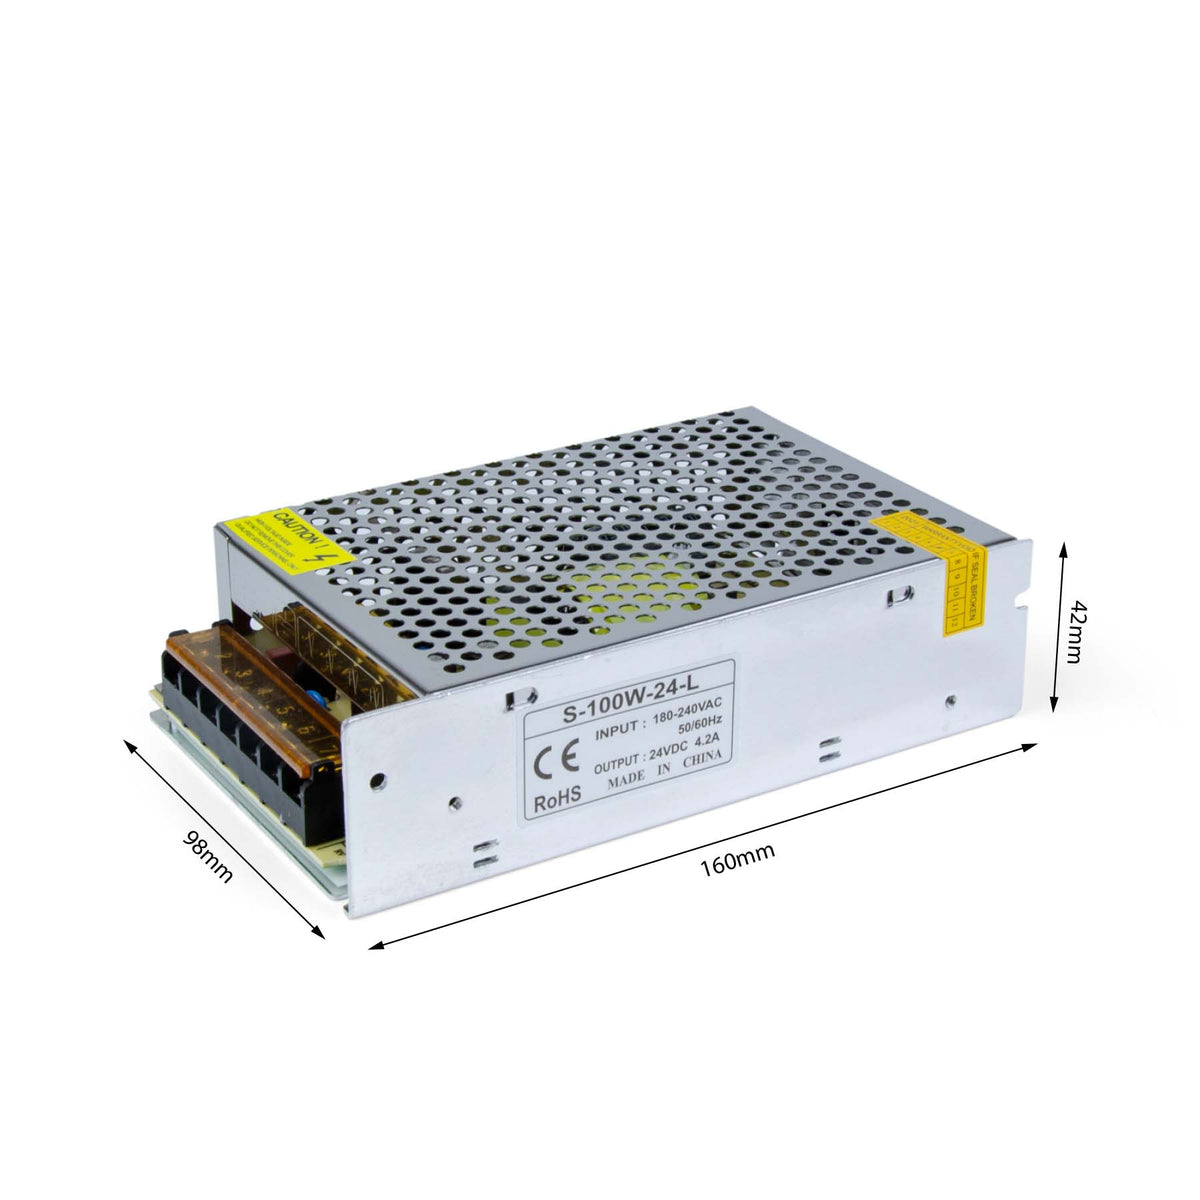 G.W.S LED Wholesale LED Drivers/LED Power Supplies IP20 (Non-Waterproof) / 24V / 96W 24V 4A 96W LED Driver